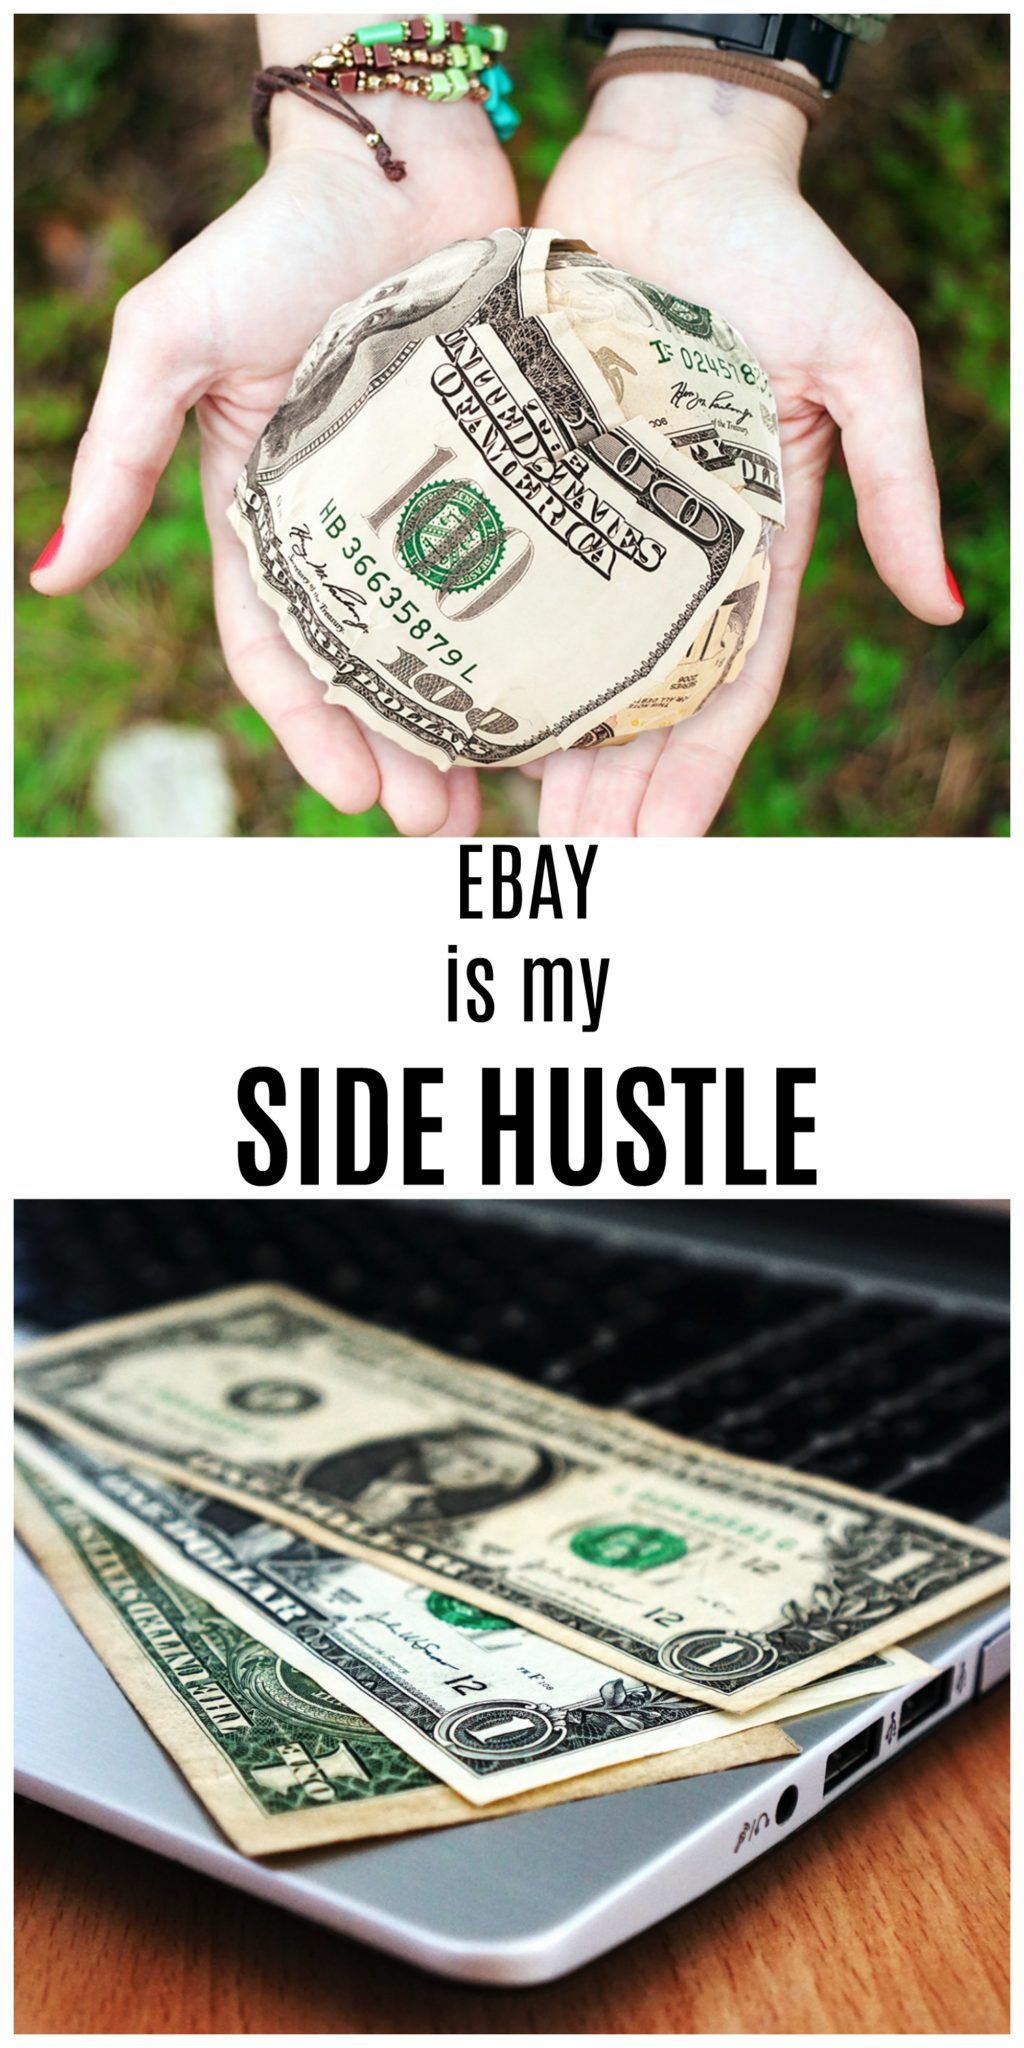 Ebay is my side hustle for earning extra money by selling things I find or no longer want.